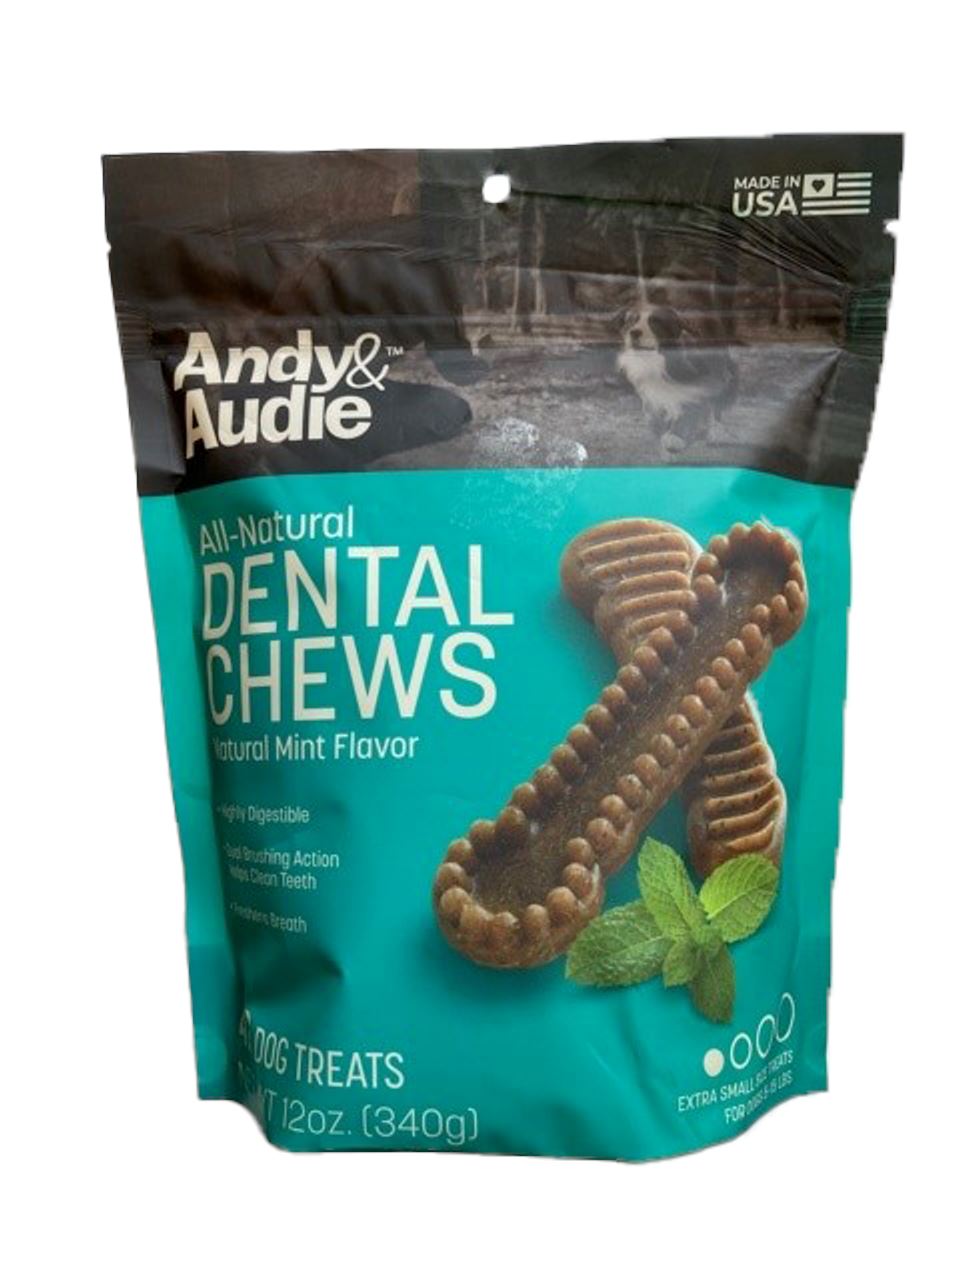 Andy & Audie All-Natural Dental Chews Natural Mint Flavor Medium Treats - 14 Count, 12 ...